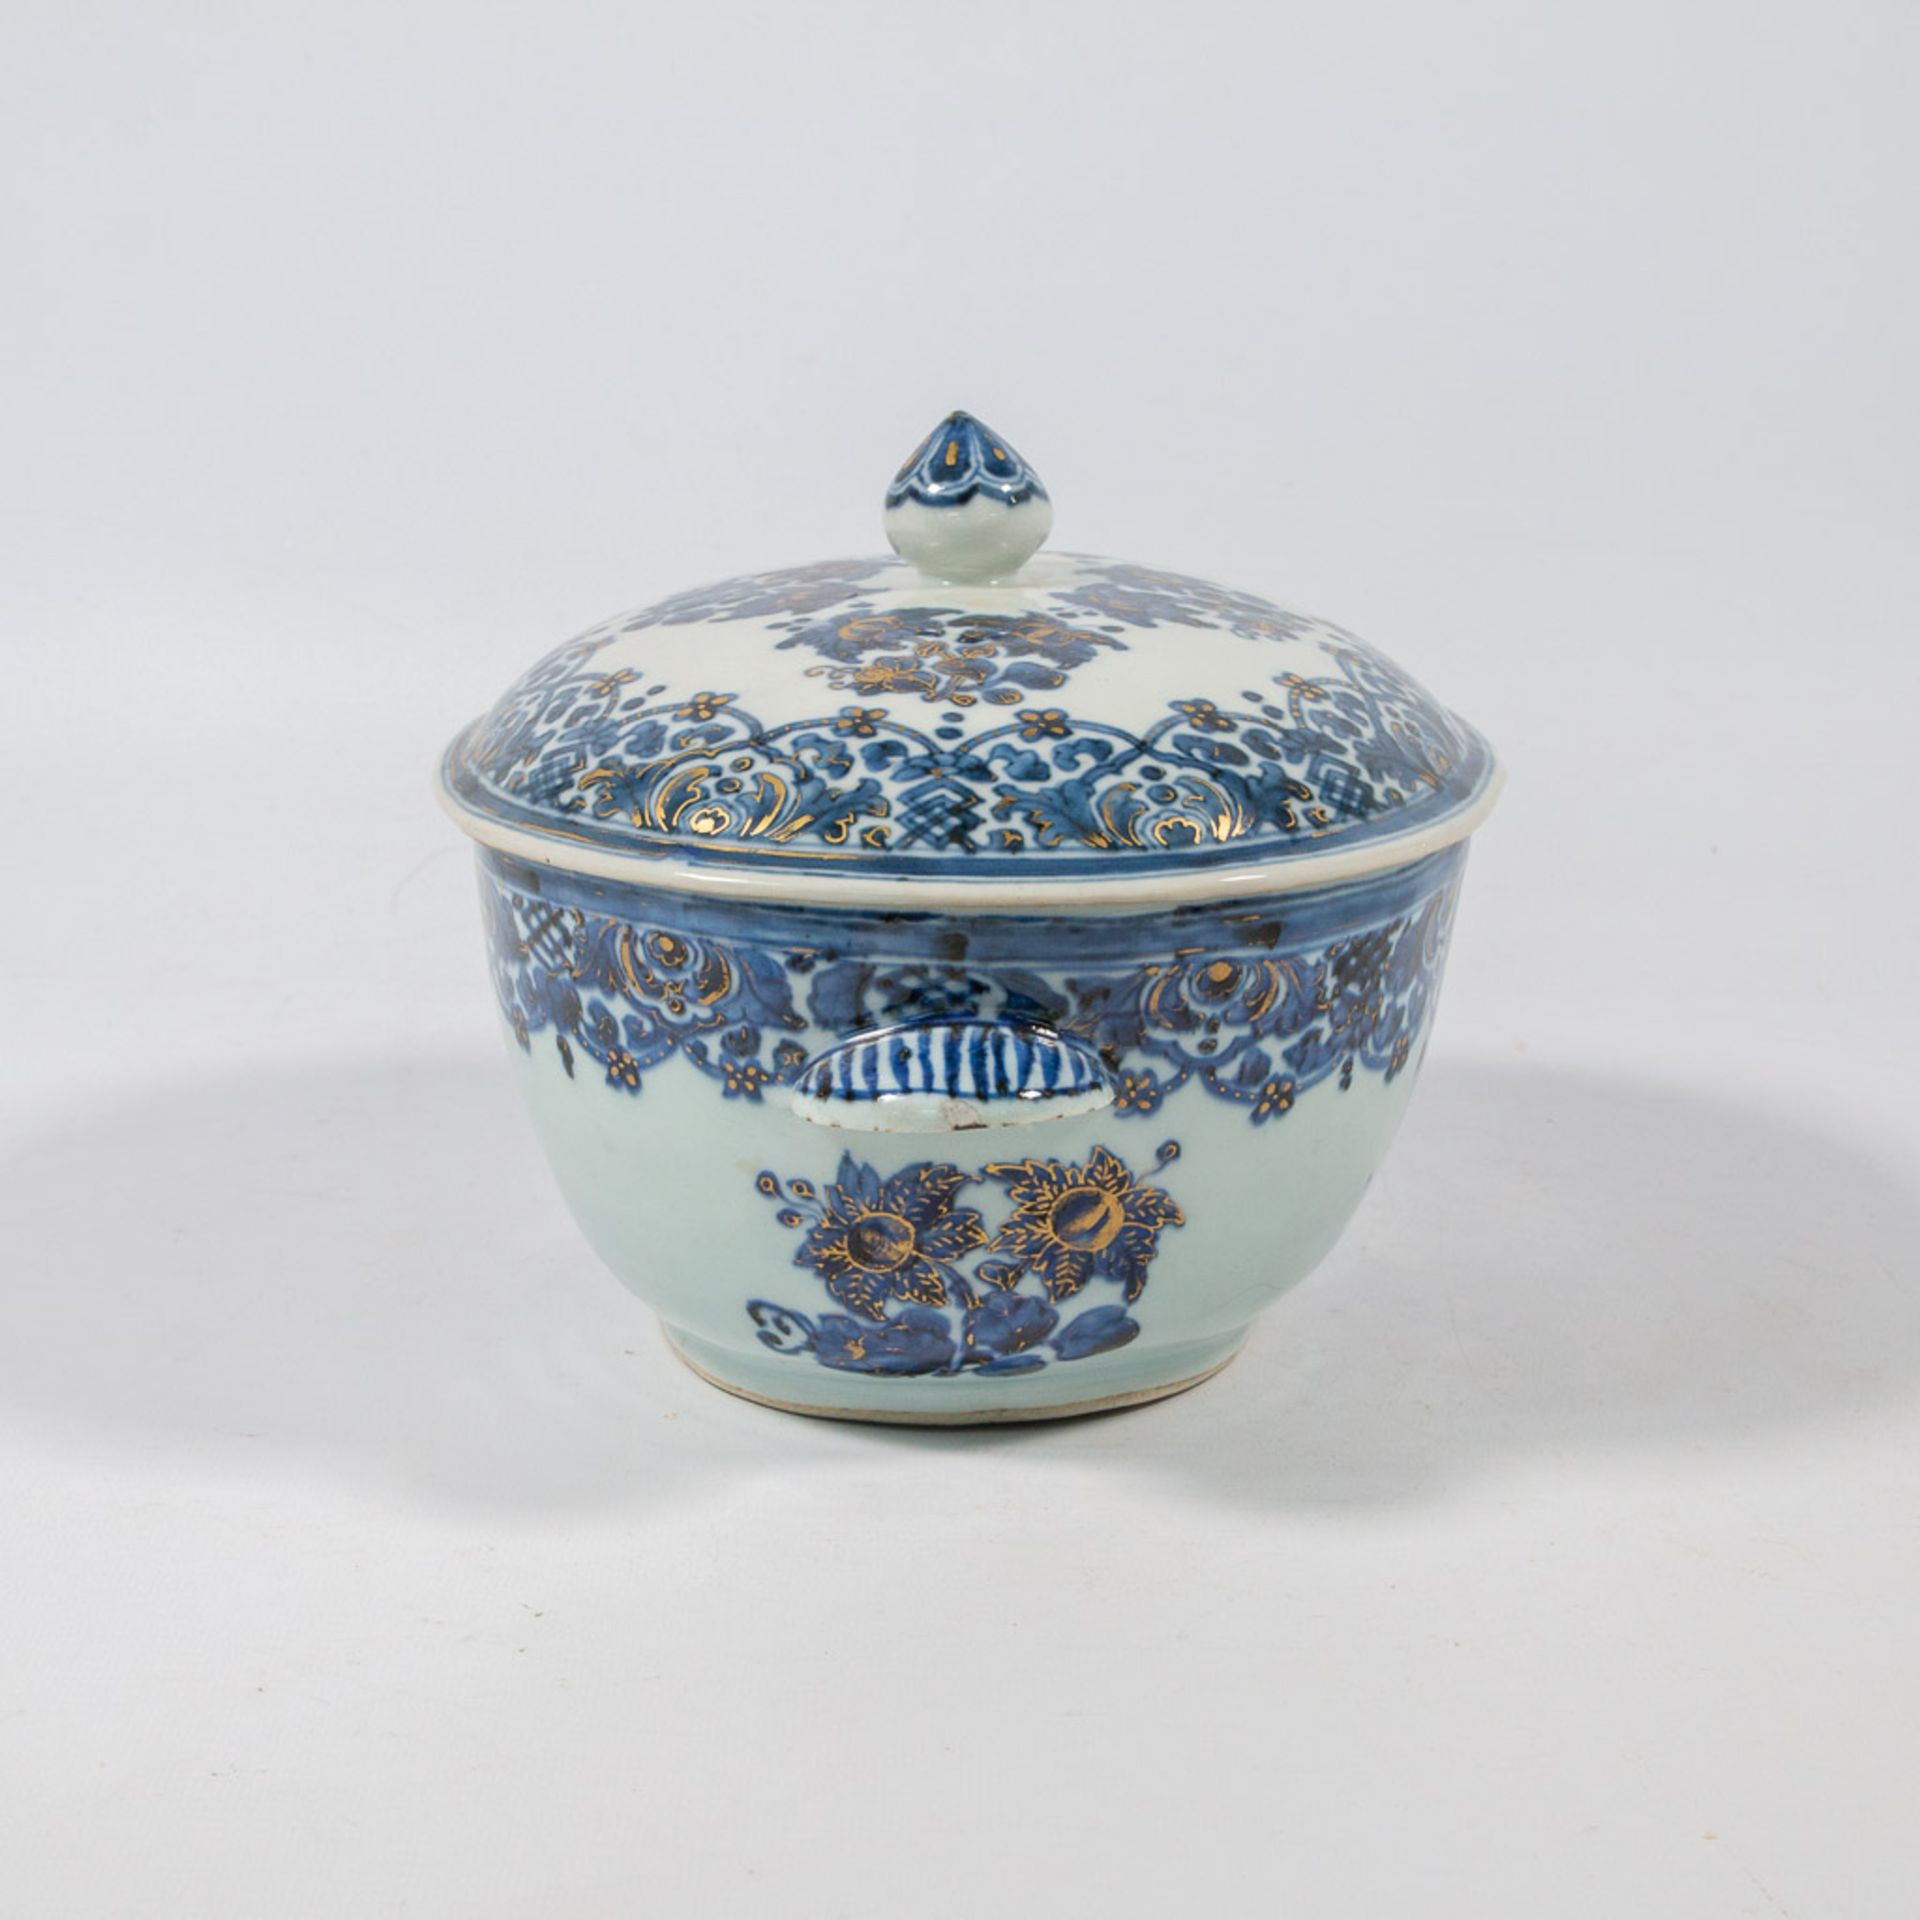 A small tureen with lid, Chinese export porcelain with underglaze blue, white and overglaze gold flo - Image 4 of 24